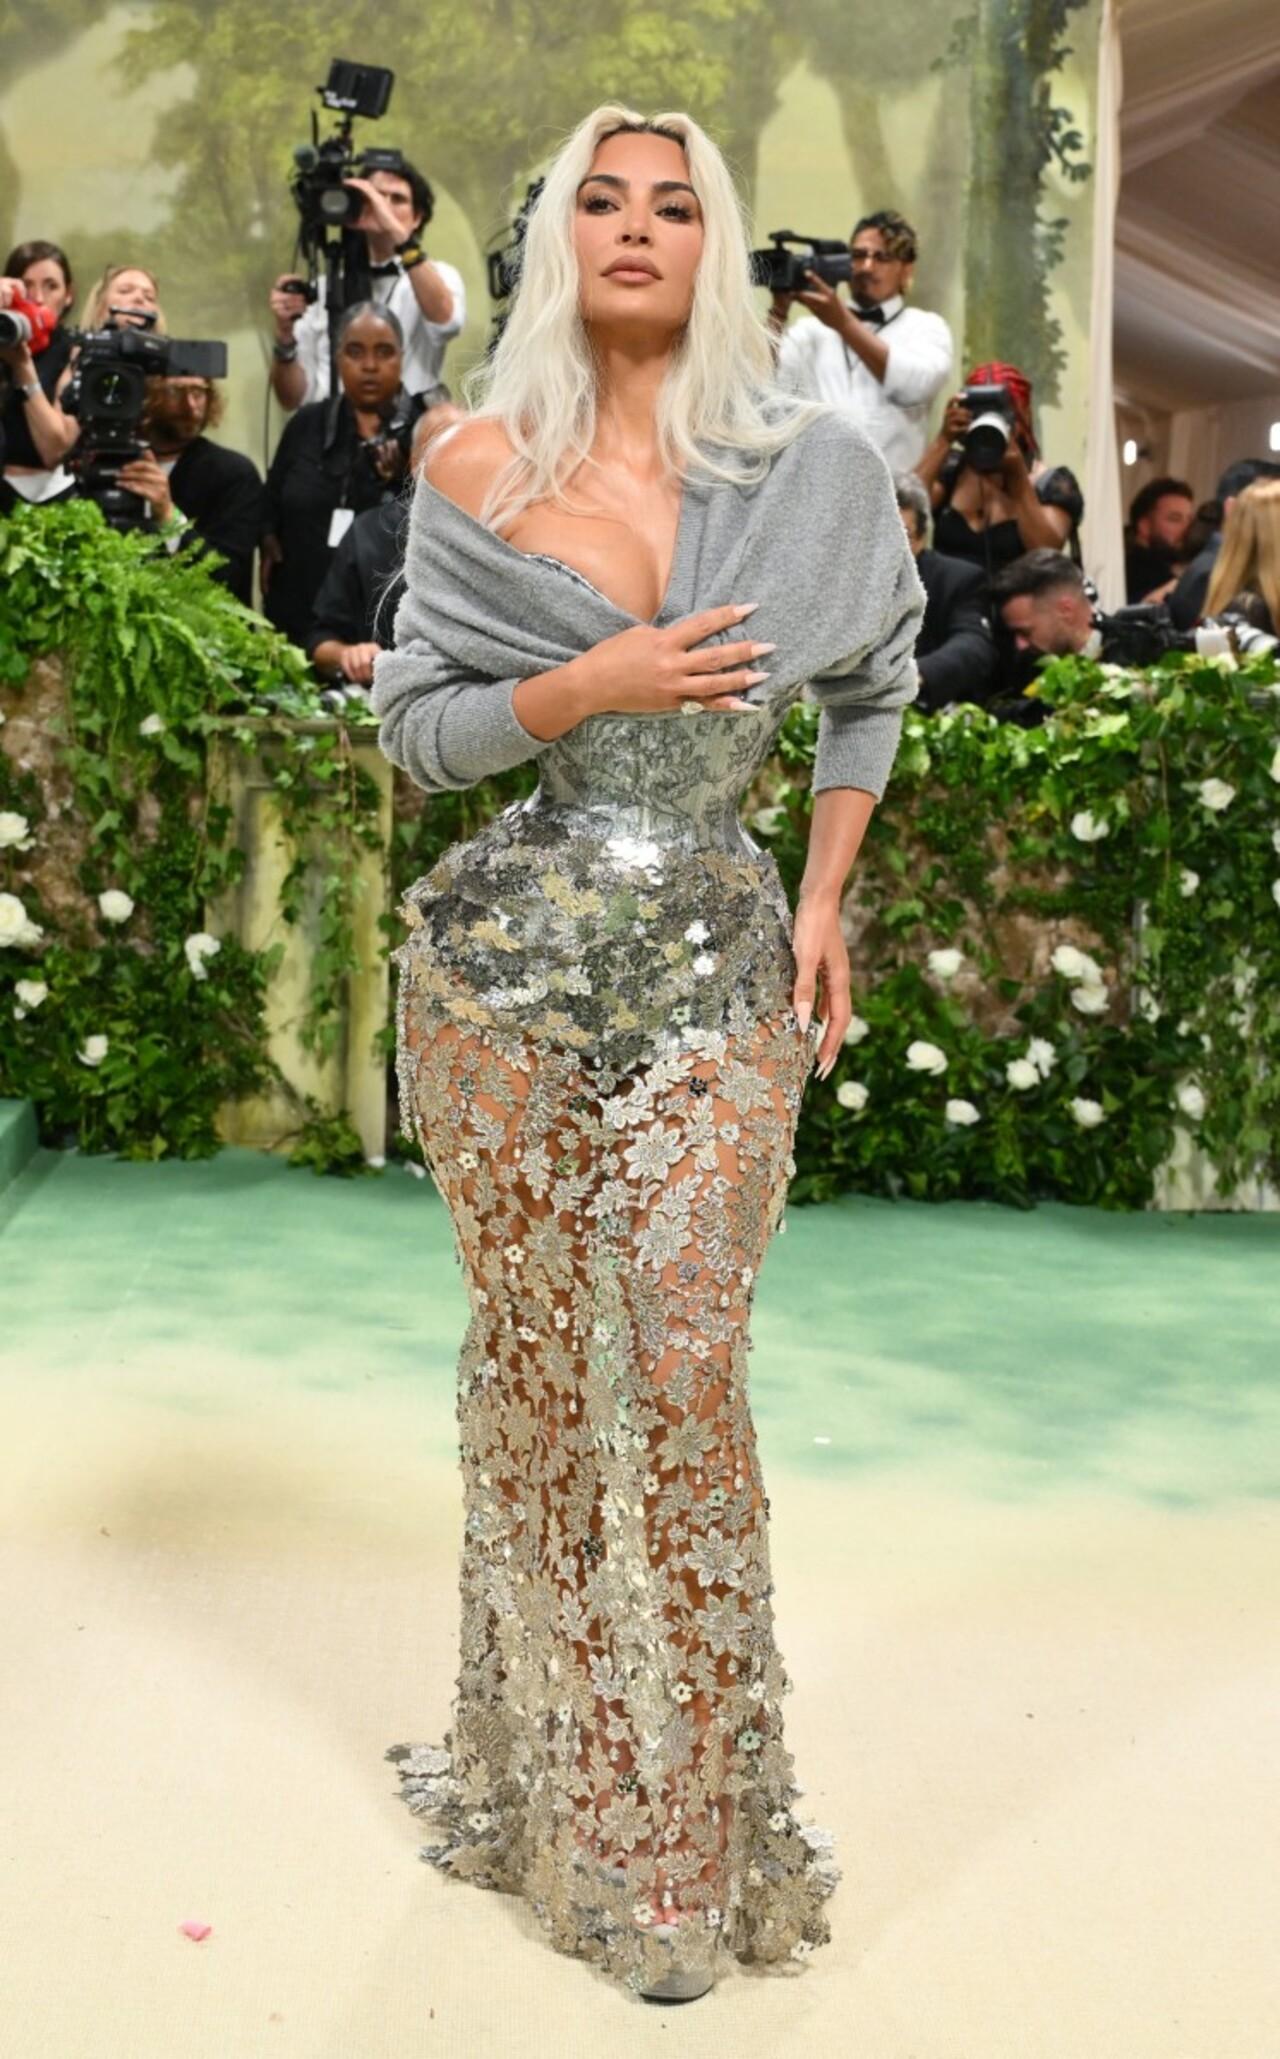 Reality star Kim Kardashian donned a sheer Margiela by John Galliano dress with a lace train featuring leaves and floral accents. The highlight of her outfit was her silver corset, giving her a drastically tiny waist.